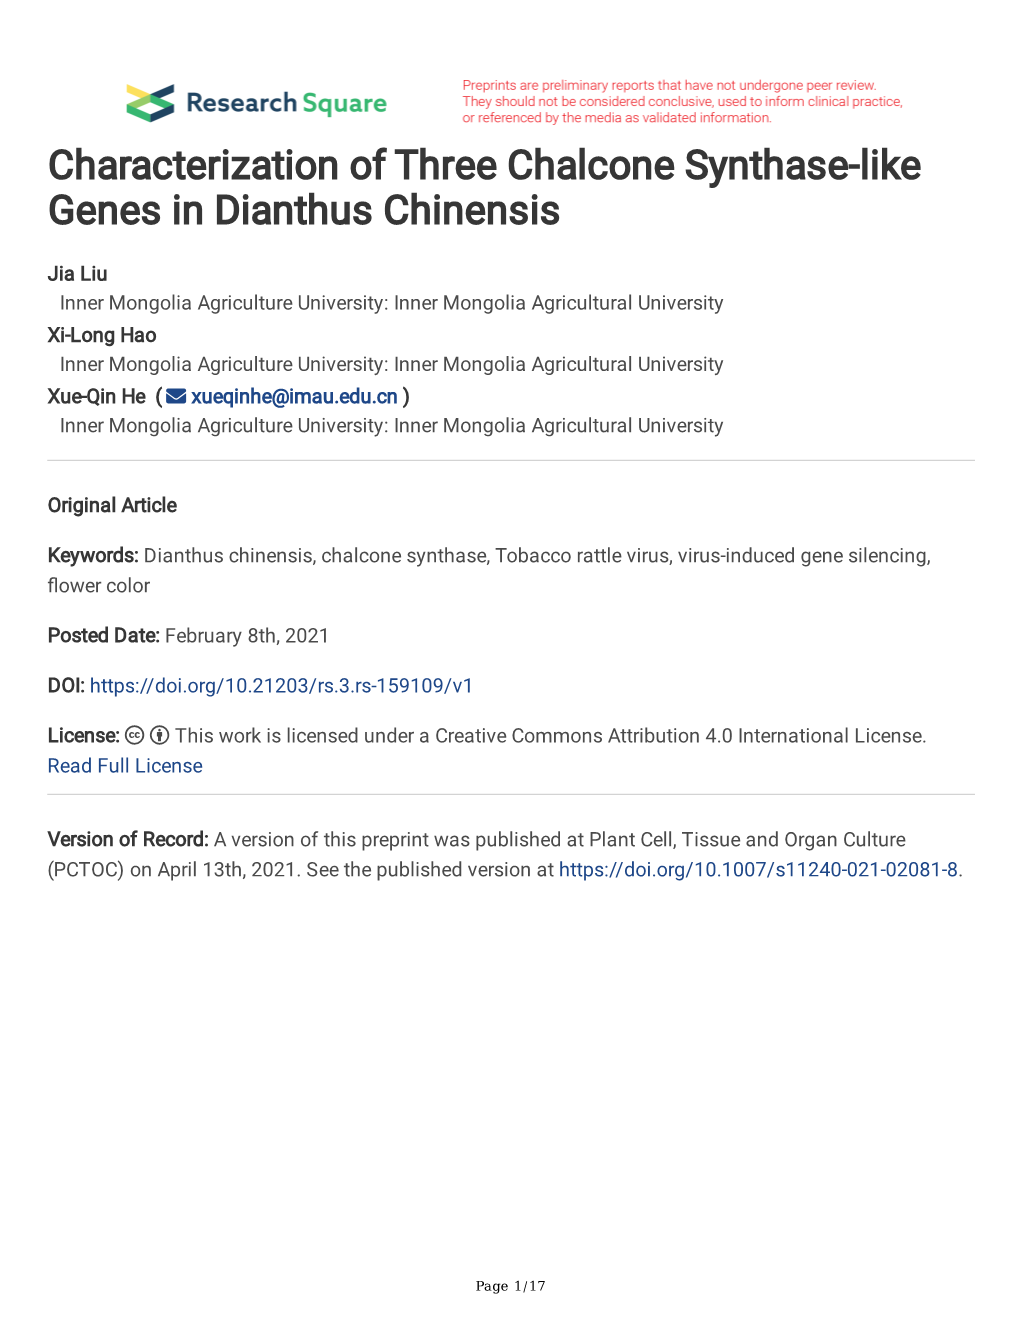 Characterization of Three Chalcone Synthase-Like Genes in Dianthus Chinensis